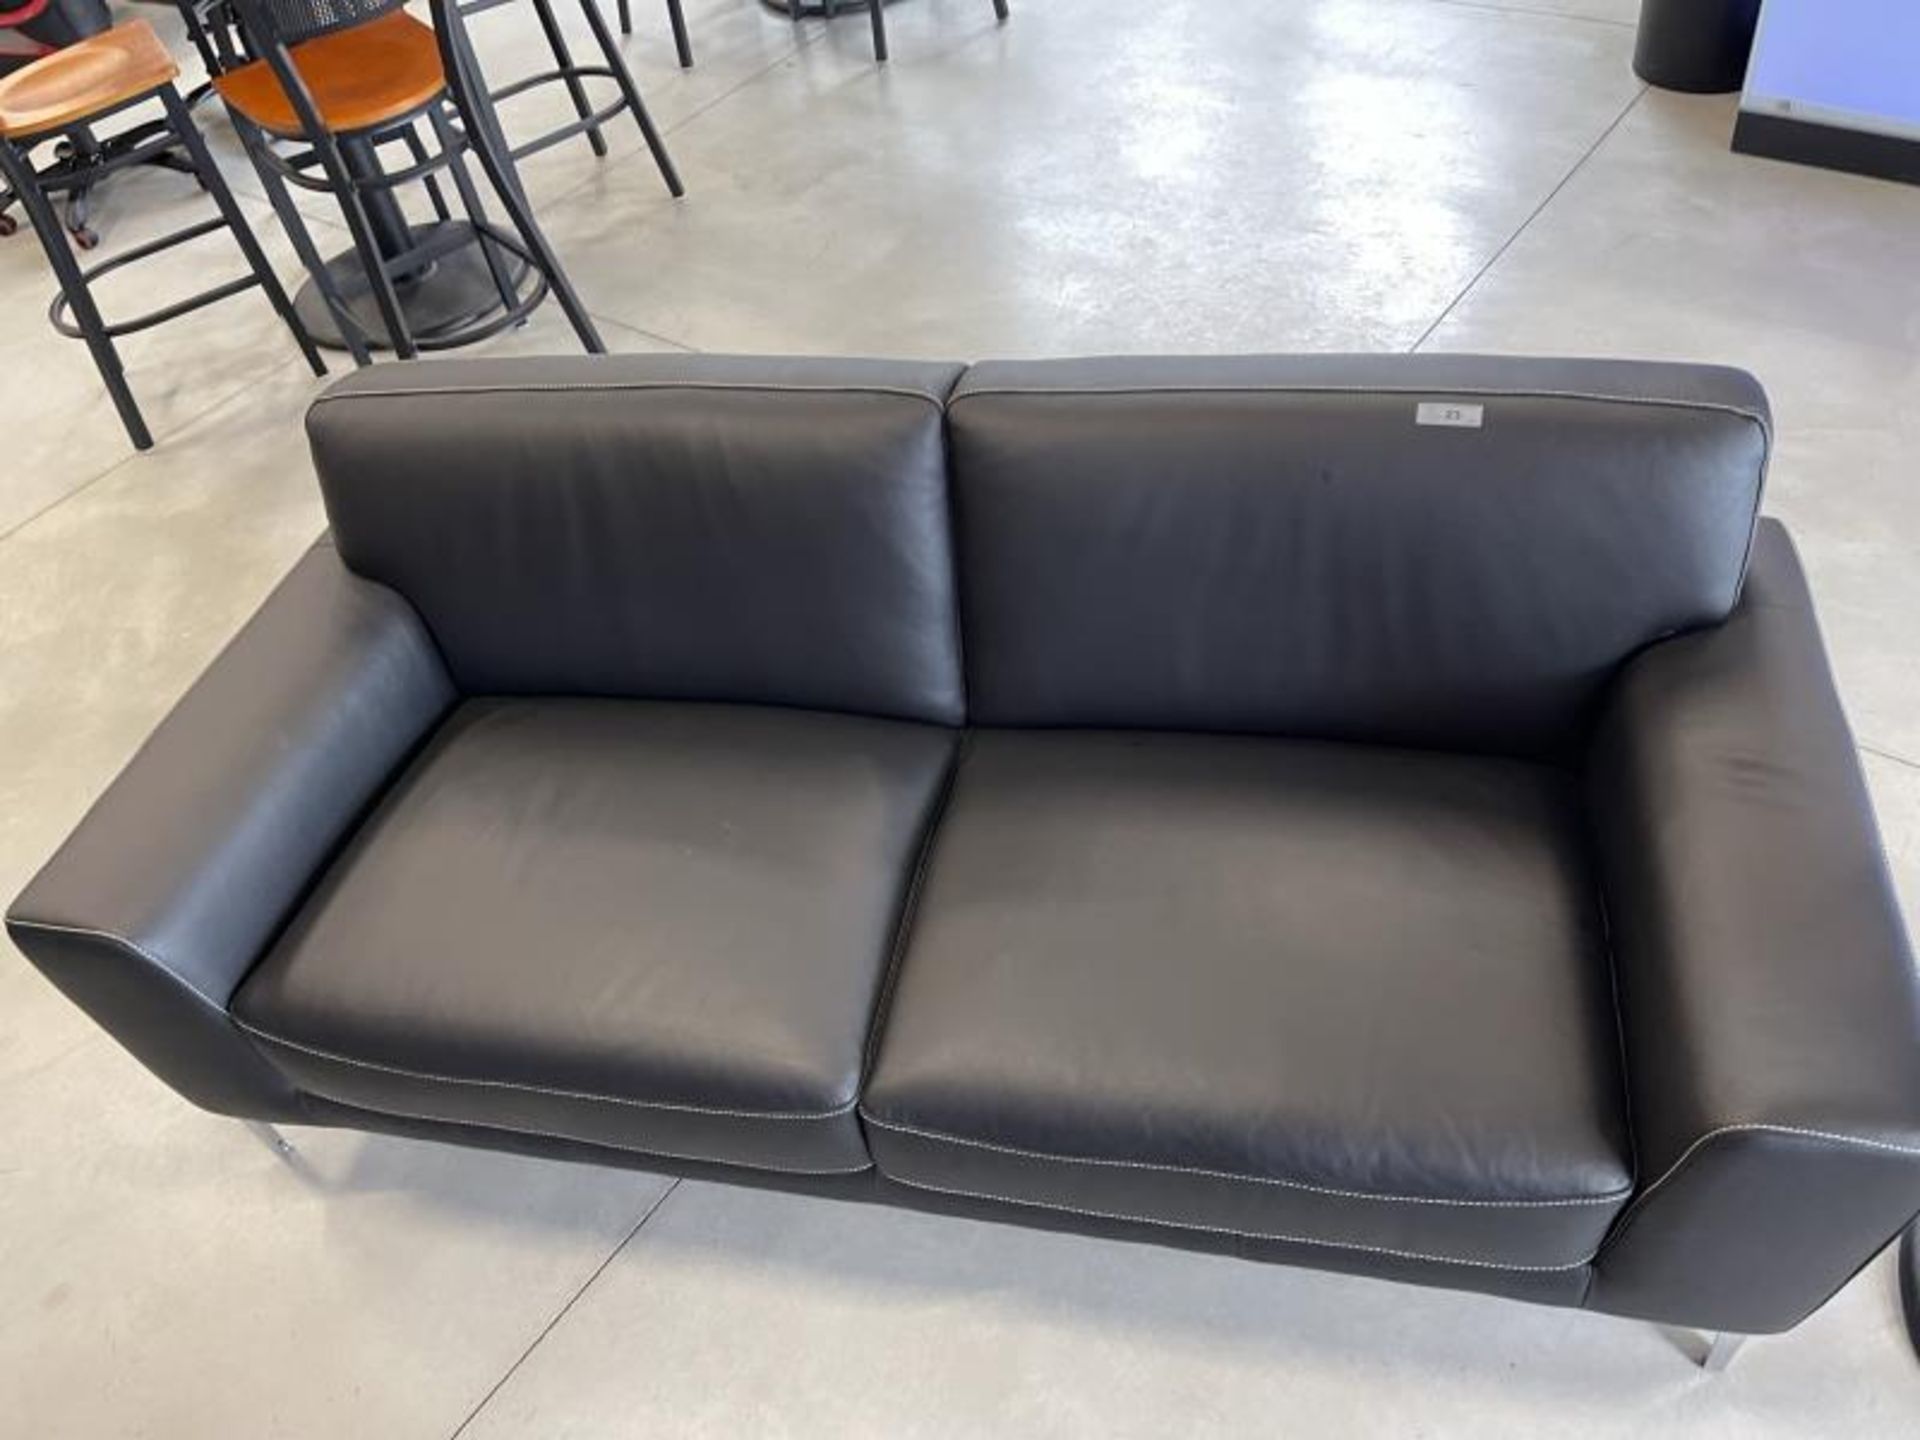 Black Leather Sofa by New Classic Furniture, Model: L986-30-BLK, 78"Long, Made 2020 - Image 3 of 5